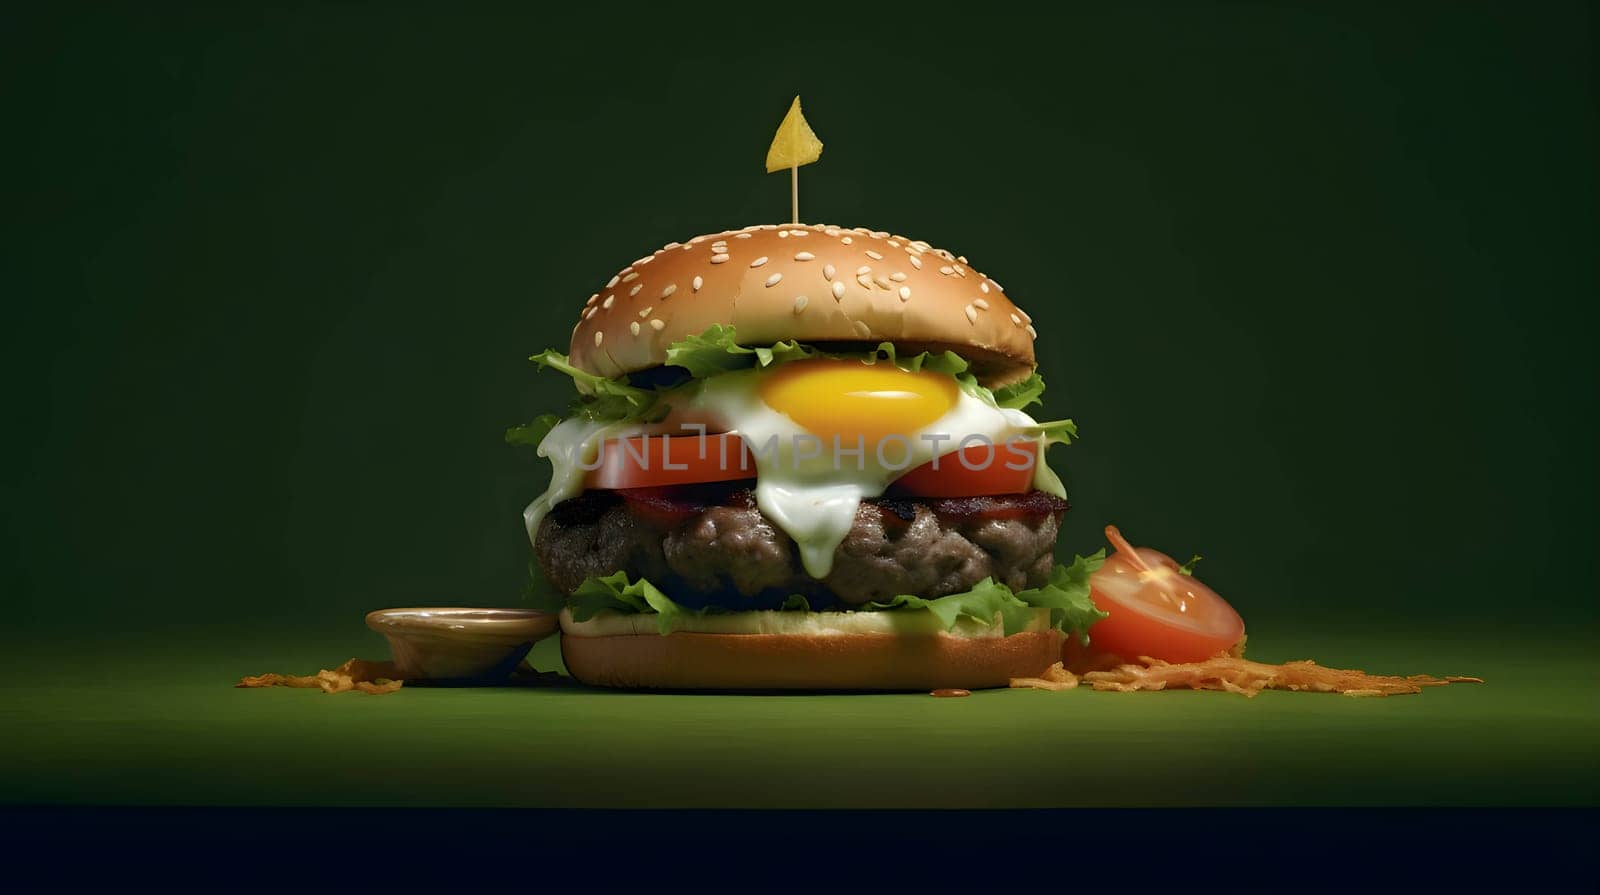 A scrumptious hamburger featuring fresh lettuce, juicy tomato slices, and a perfectly cooked egg, creating a delightful combination of flavors.